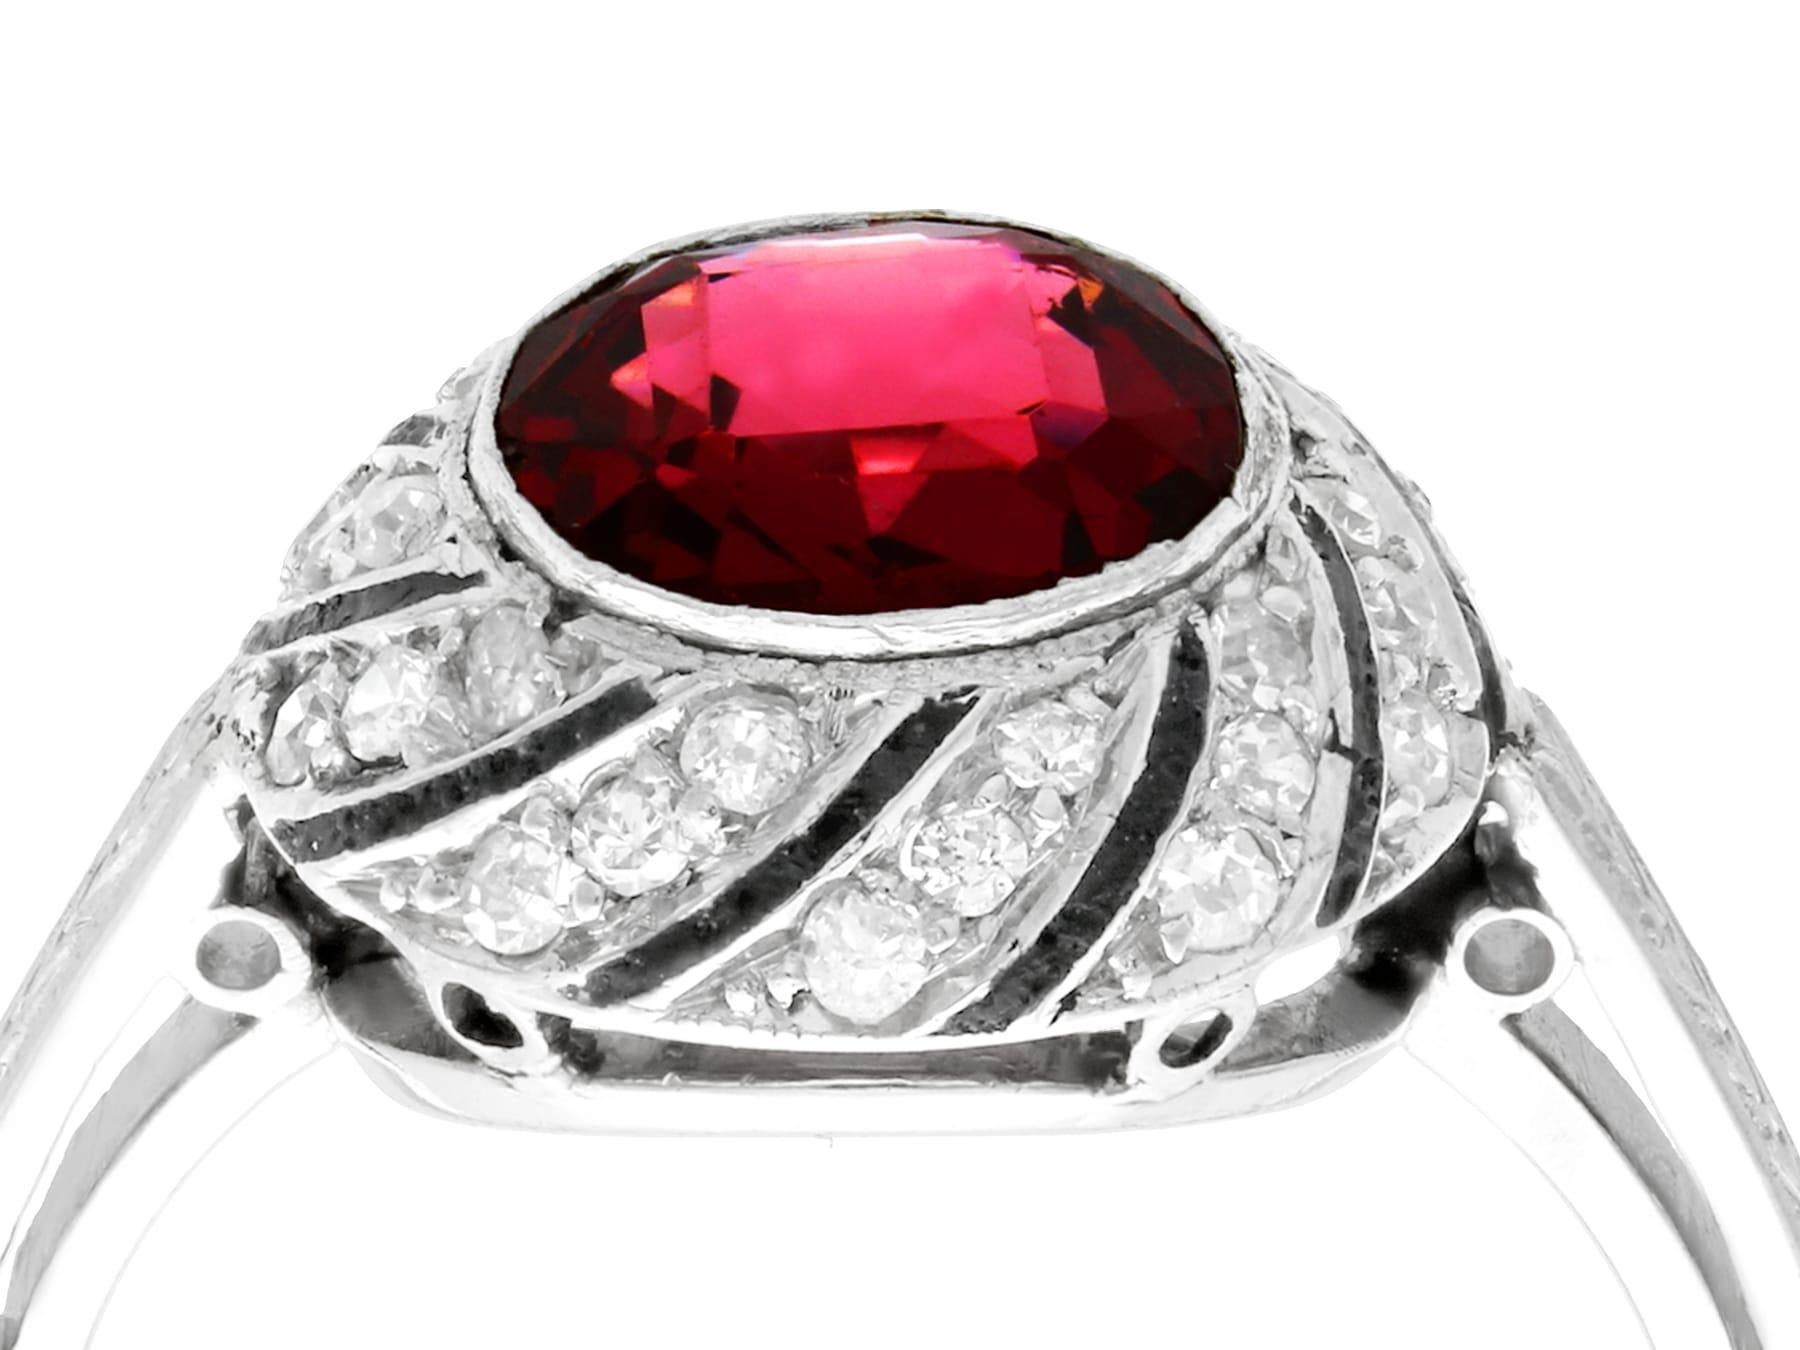 An impressive antique 1920s 2.30 carat garnet and 0.30 carat diamond, platinum dress ring; part of our diverse antique jewelry collections.

This fine and impressive antique ring has been crafted in platinum.

The circular domed setting displays a